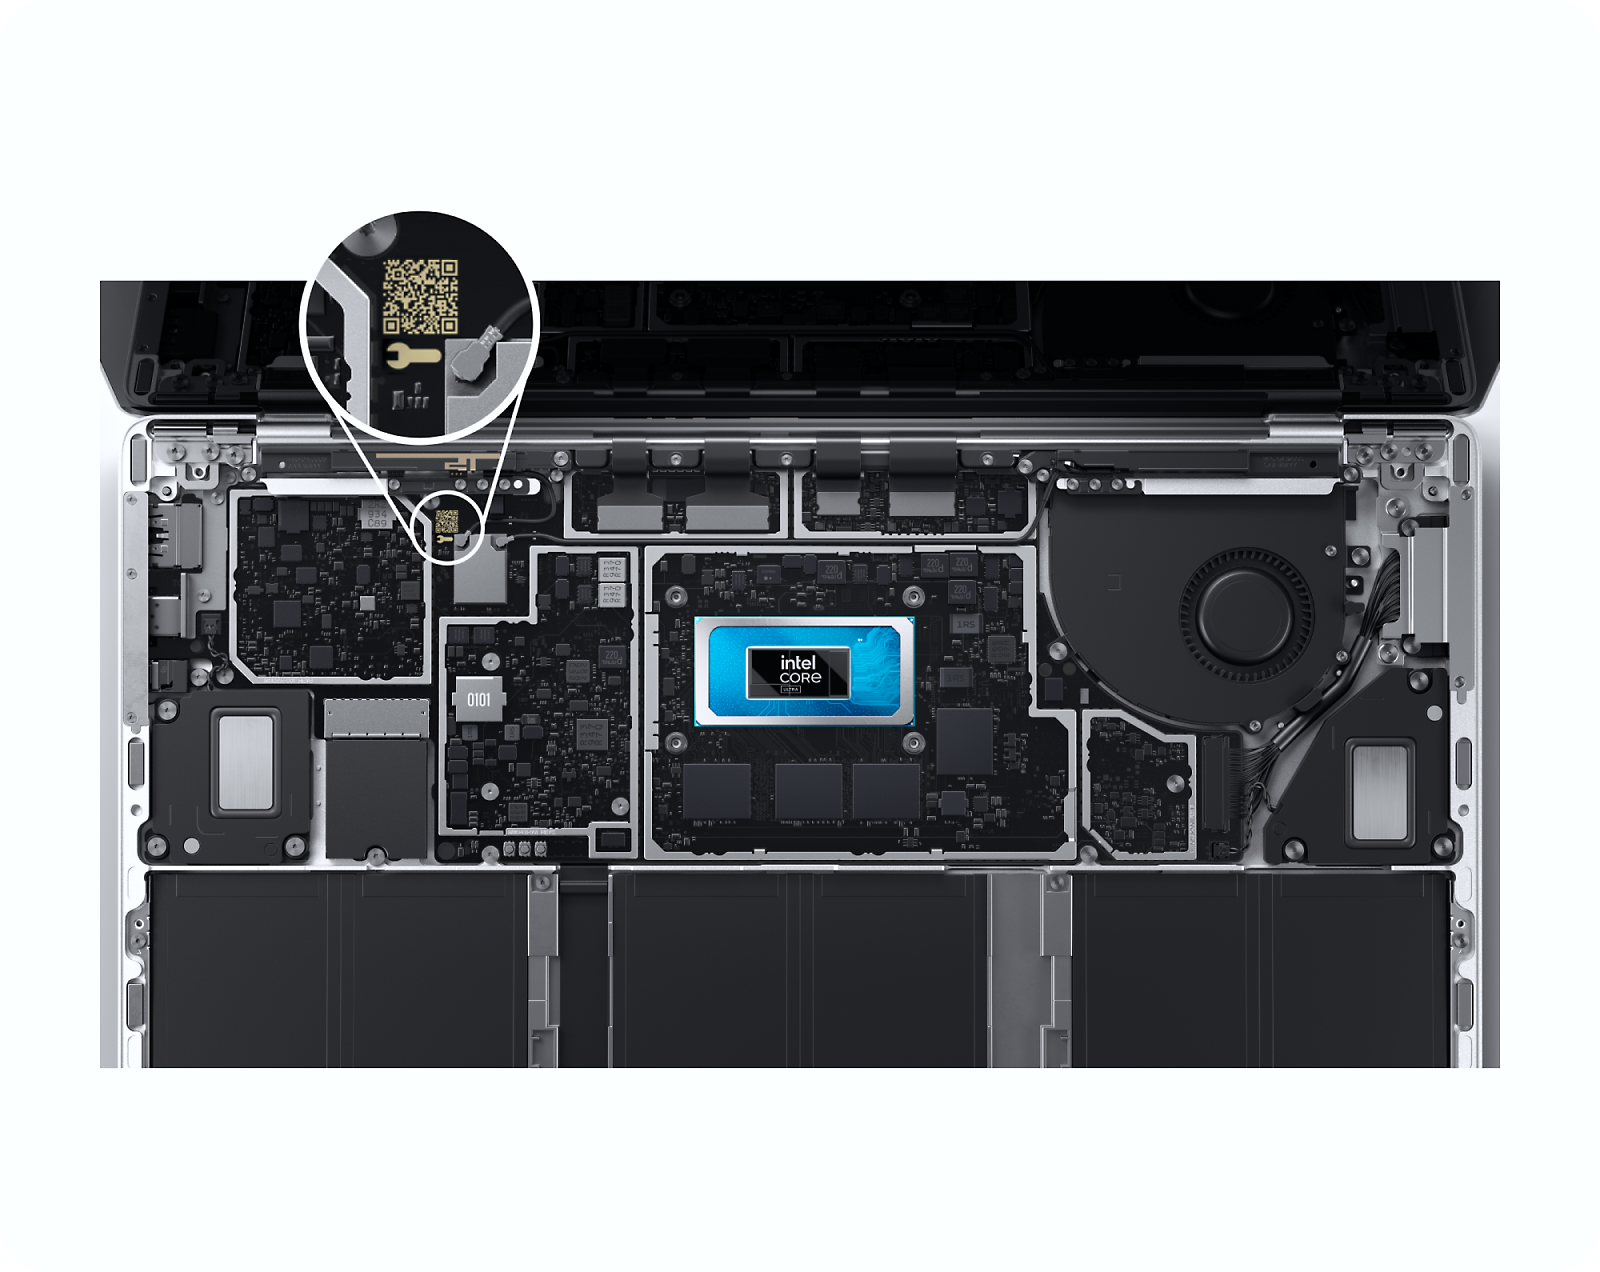 Image showing the internal components of a laptop, including a visible Intel Core chip at the center